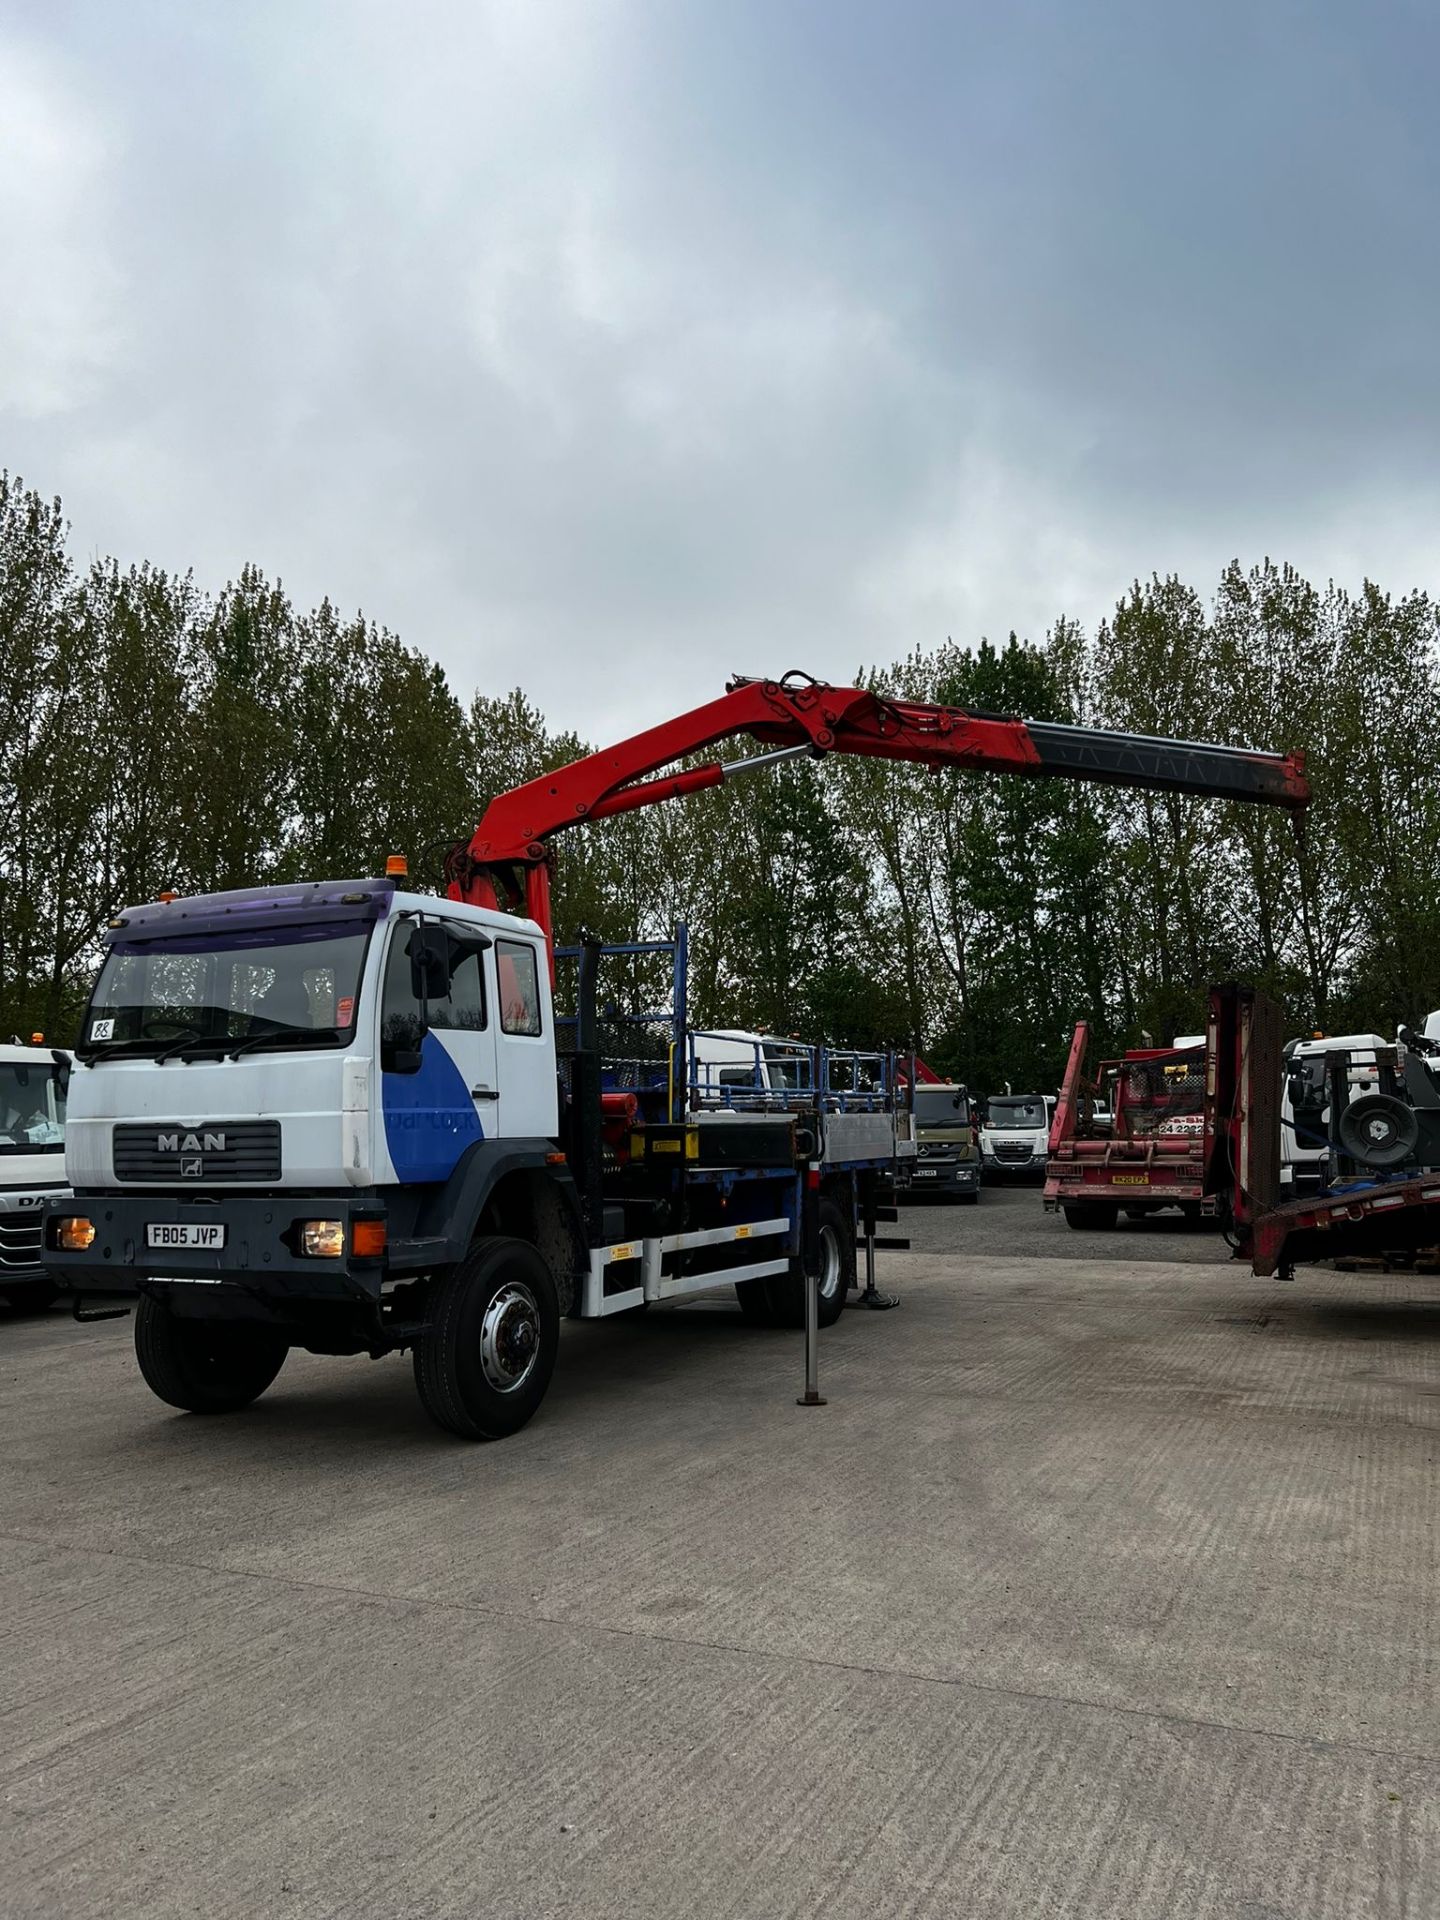 2005 MAN 4X4 TRUCK WITH CRANE - Image 9 of 13